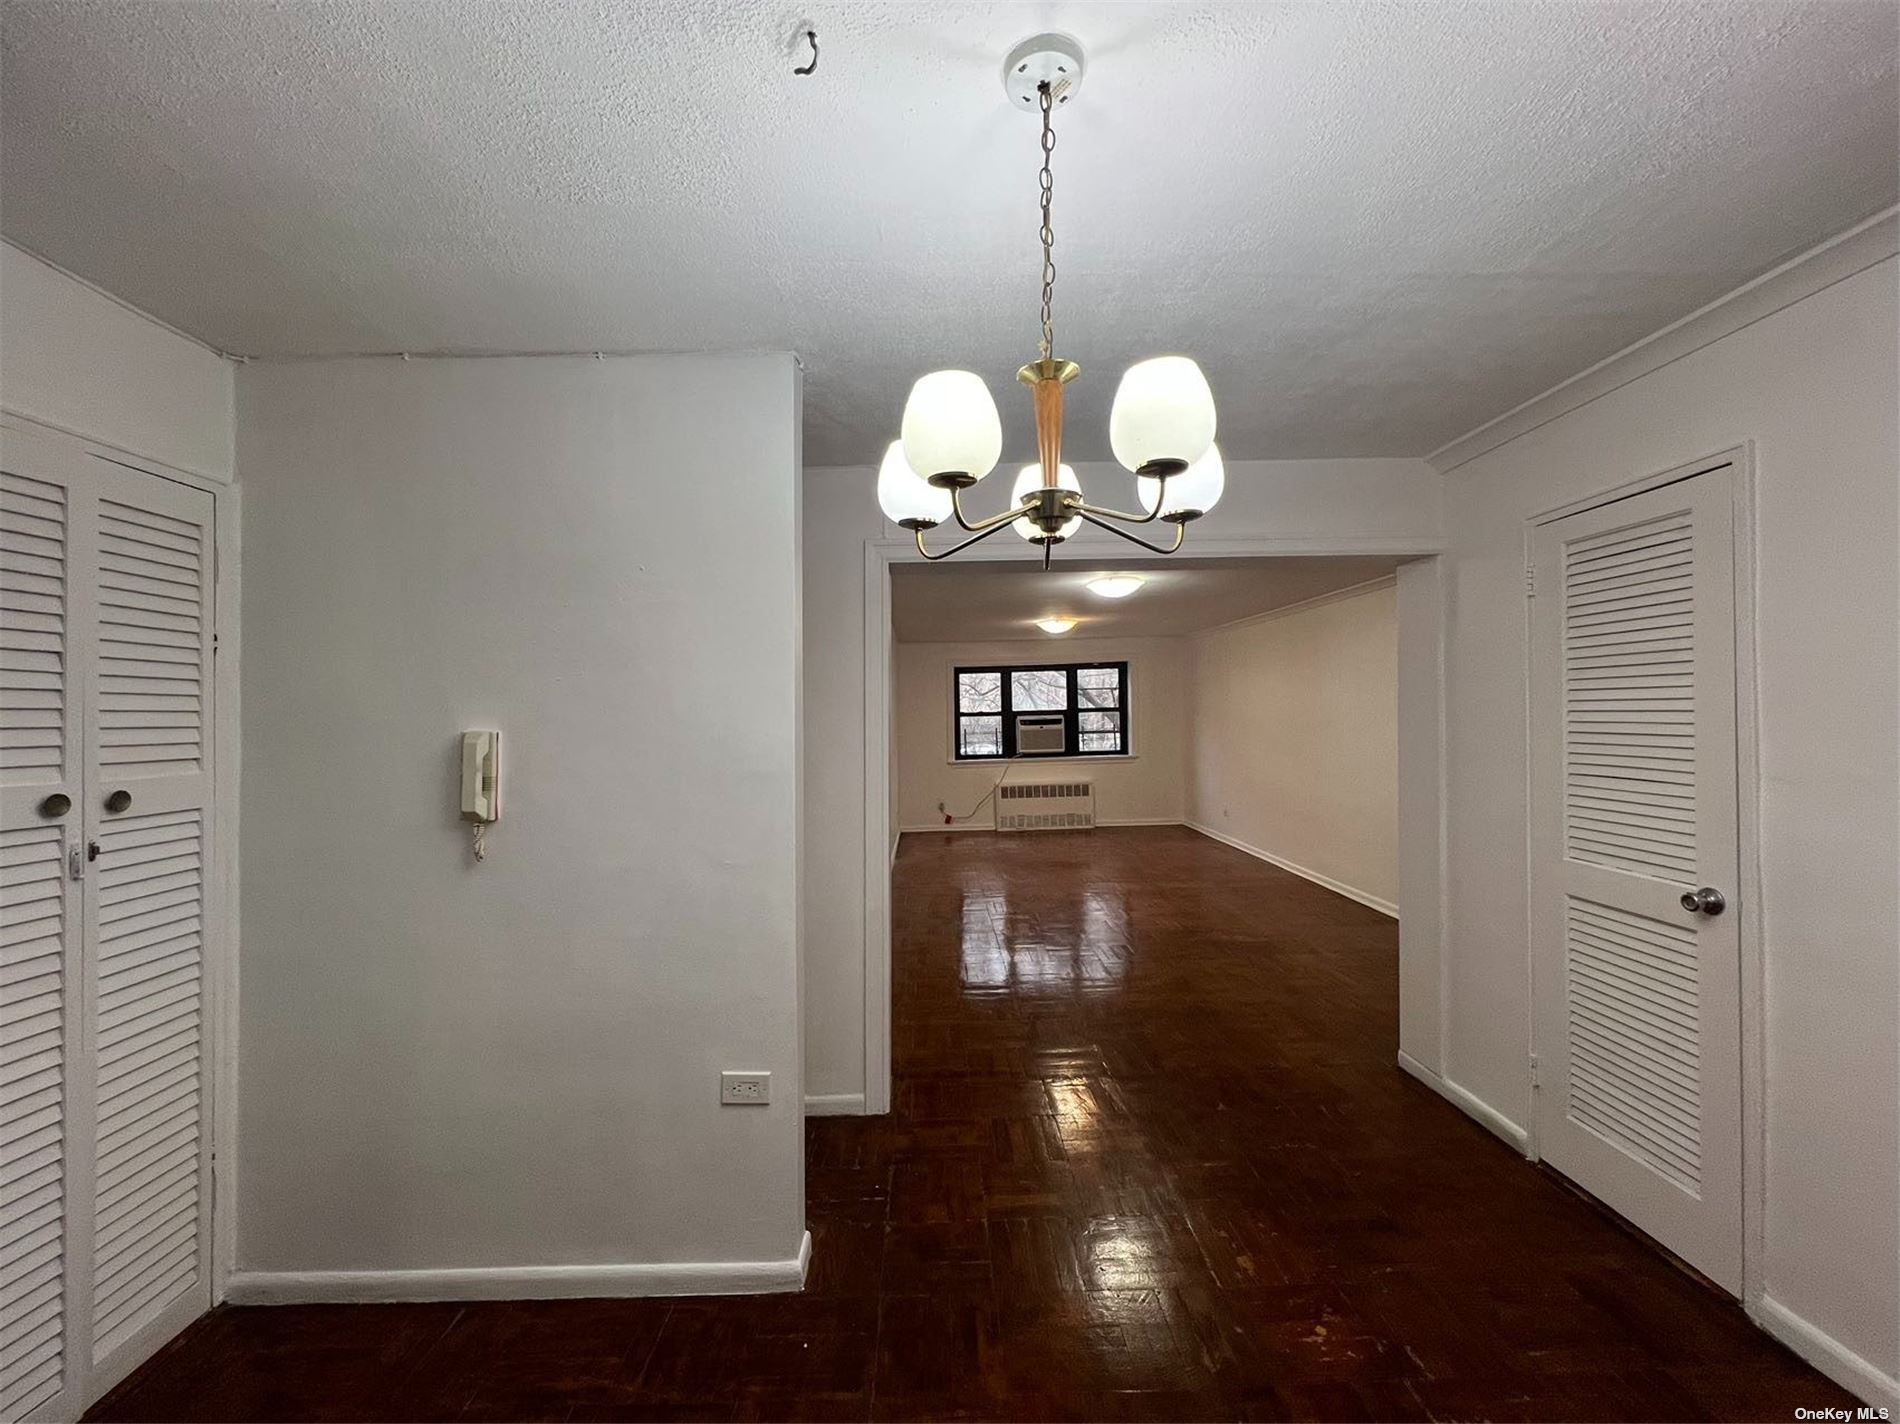 a view of a hallway with wooden floor and chandelier